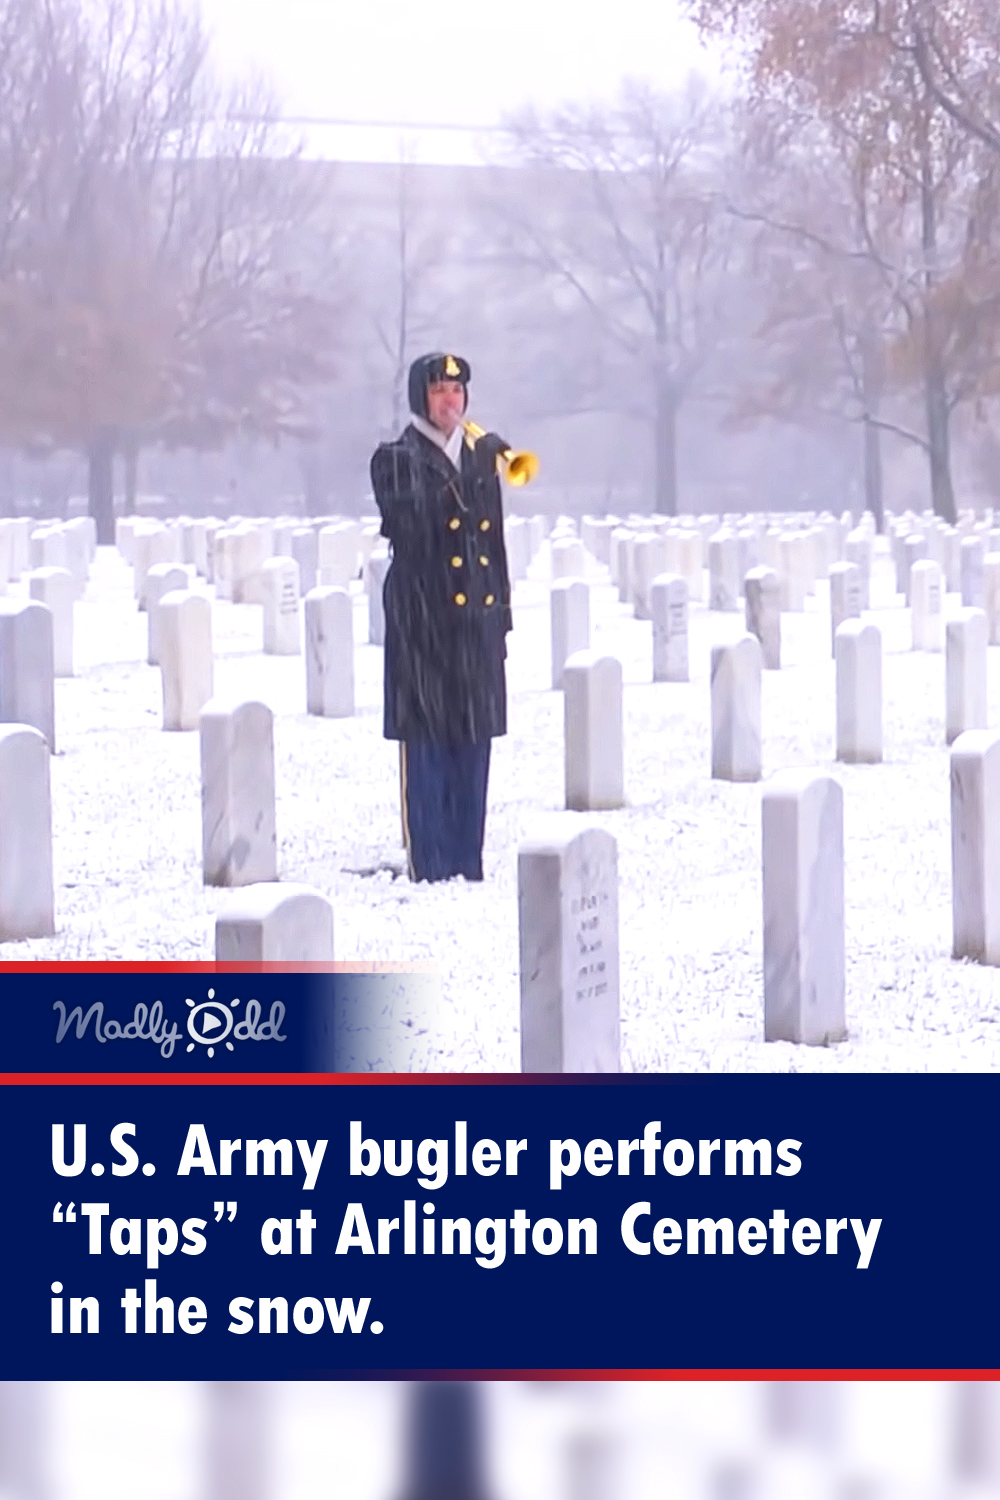 U.S. Army bugler performs “Taps” at Arlington Cemetery in the snow